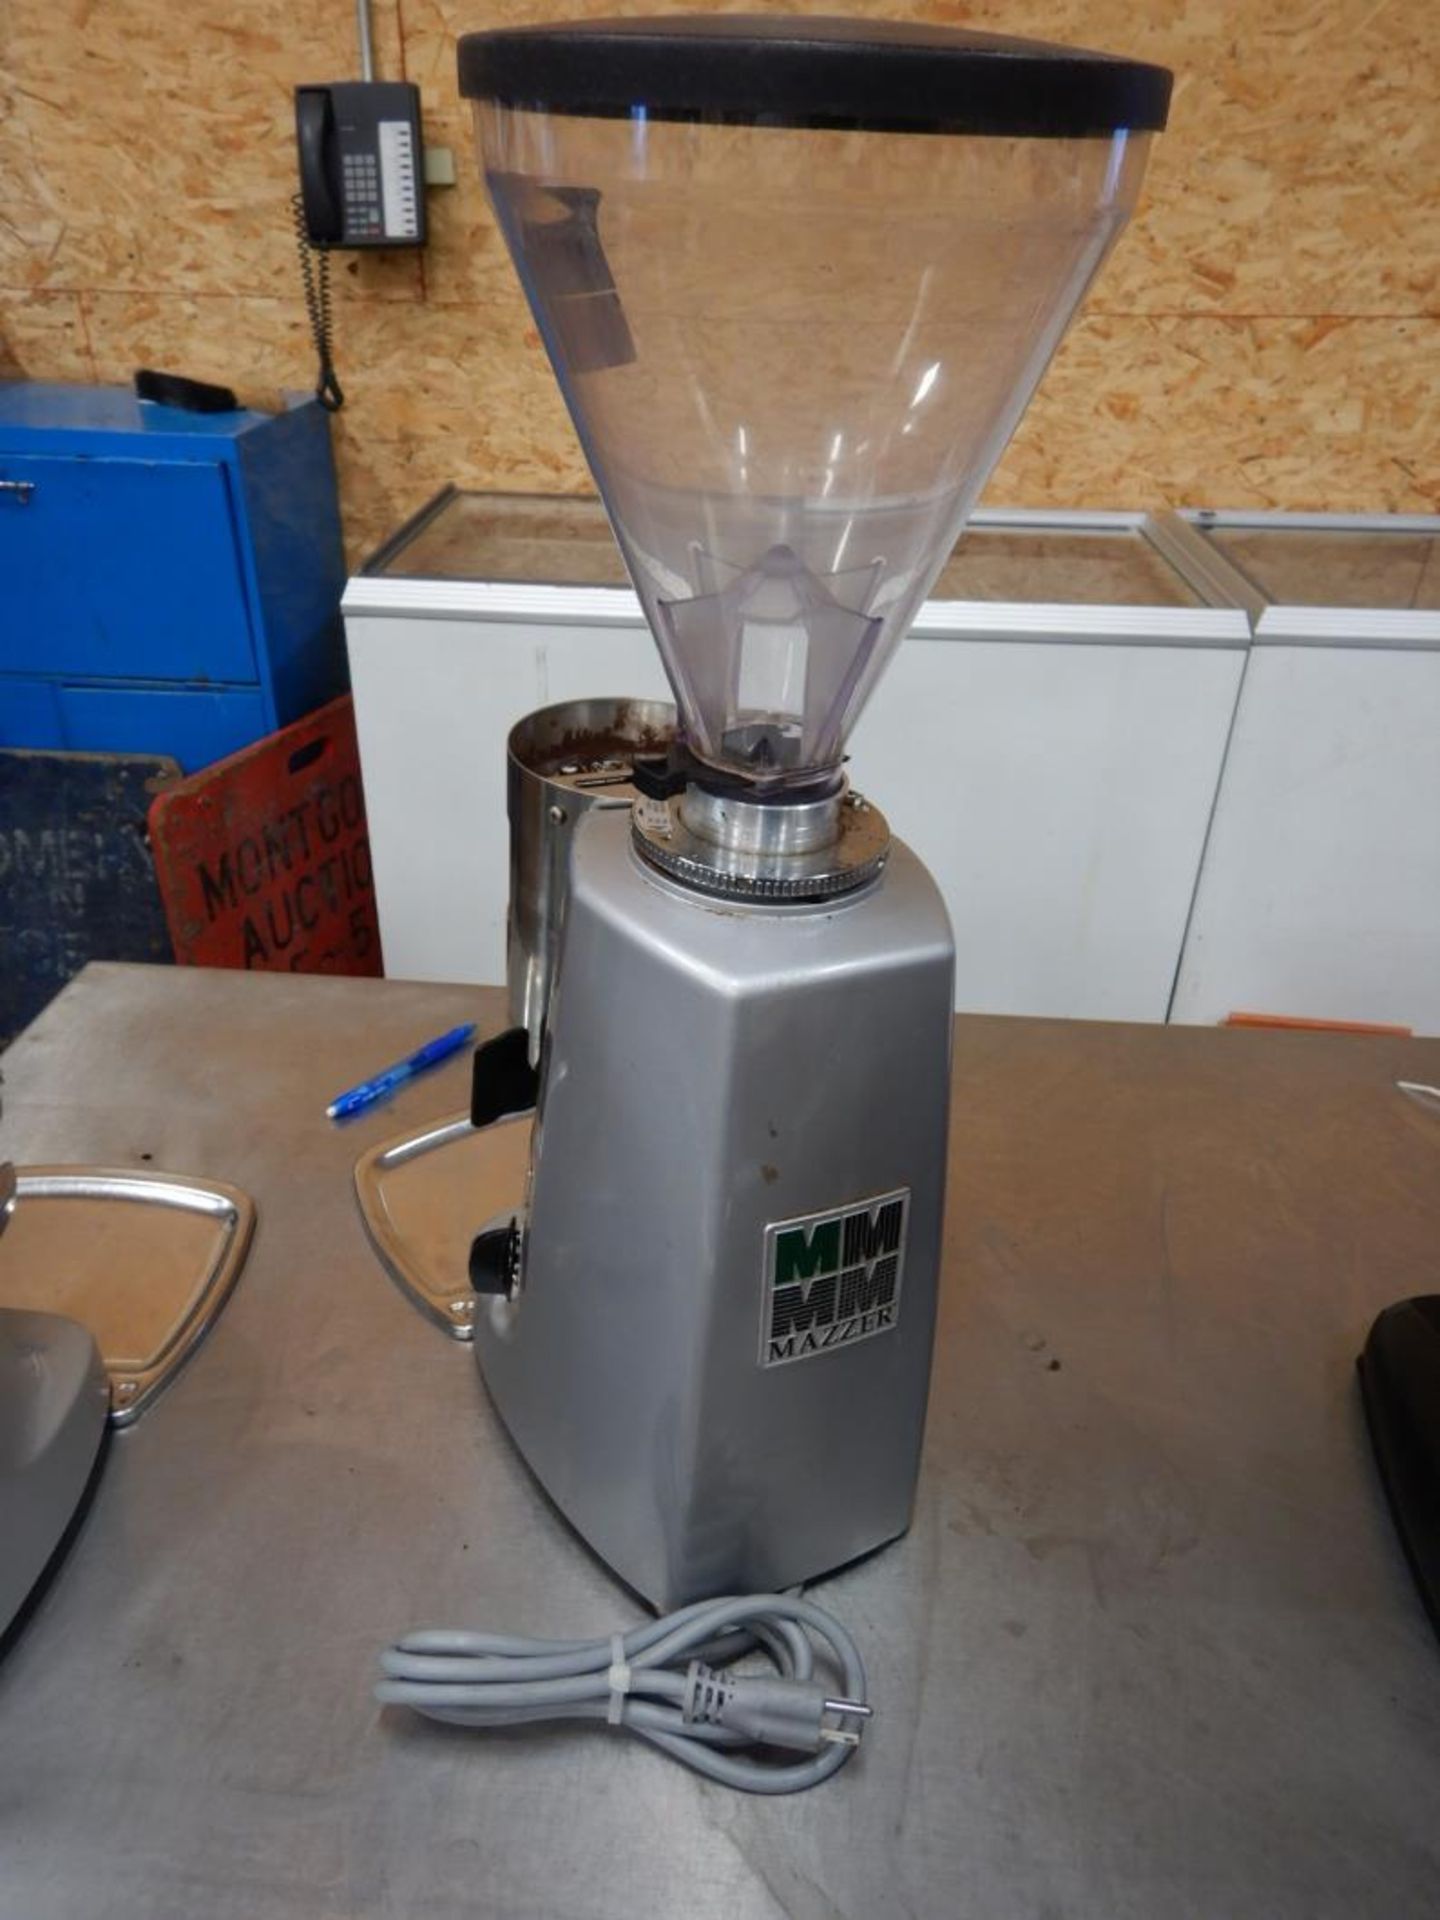 MAZZER SUPER JOLLY TIMER ELECTRONIC EXPRESSO GRINDER S/N 1204984(NOT WORKING – NEEDS REPAIR) - Image 4 of 4